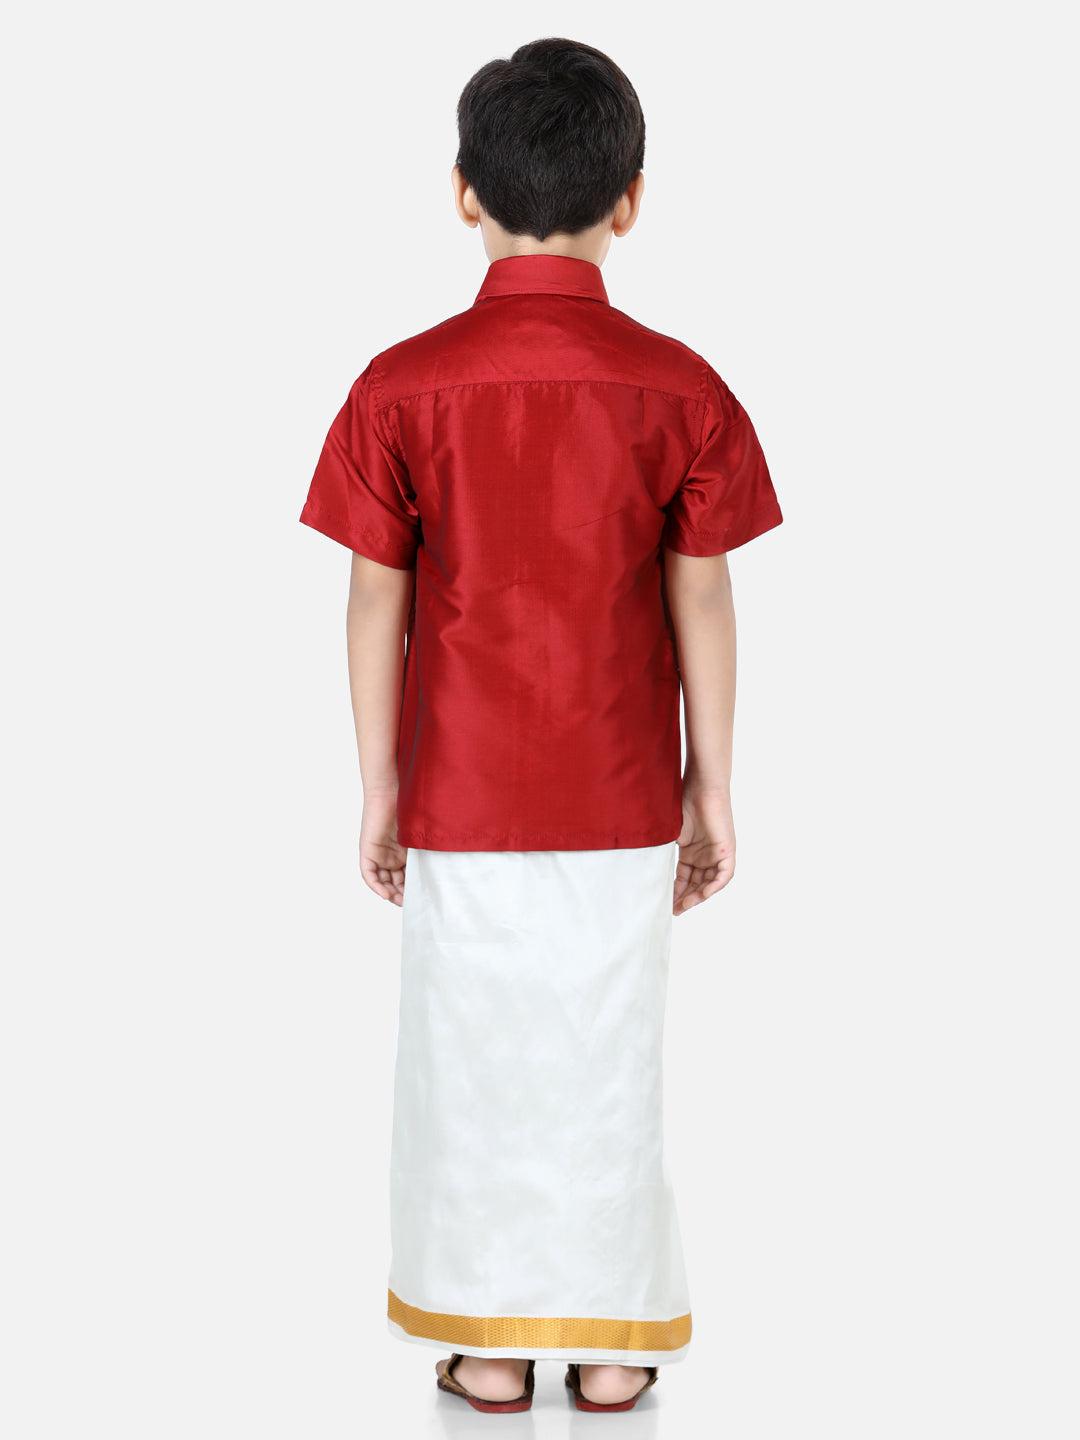 BownBee Half Sleeves Solid Shirt With Mundu Dhoti - Red